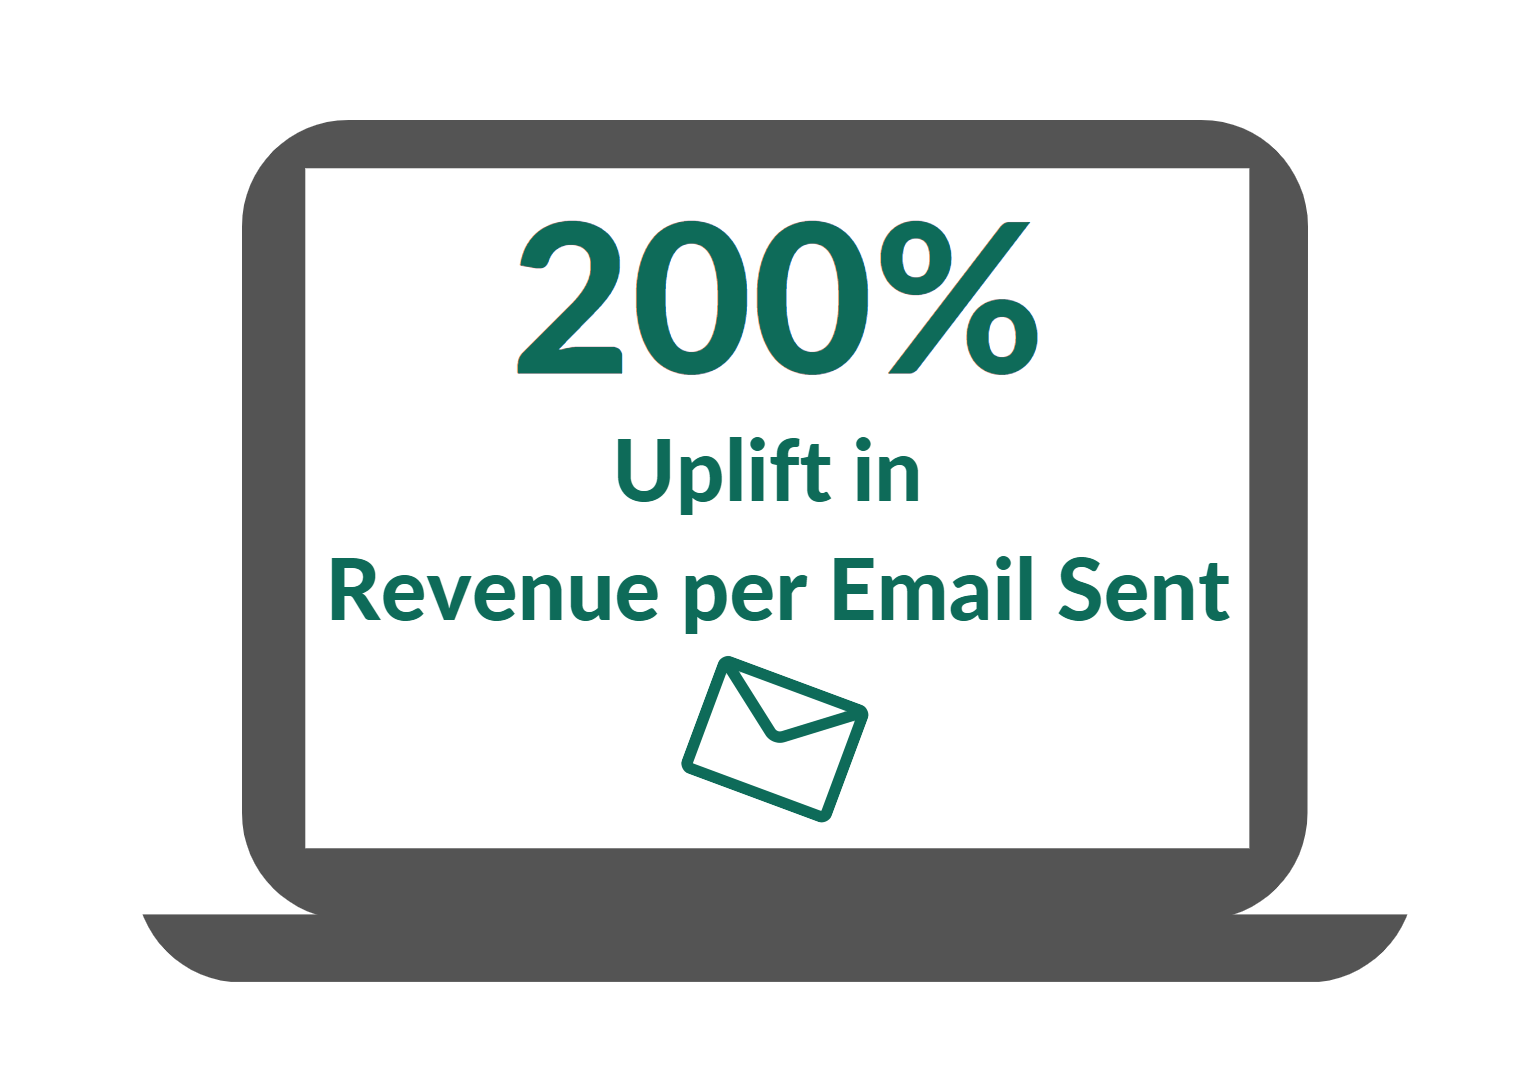 Graphic showing 200% uplift in revenue per email sent